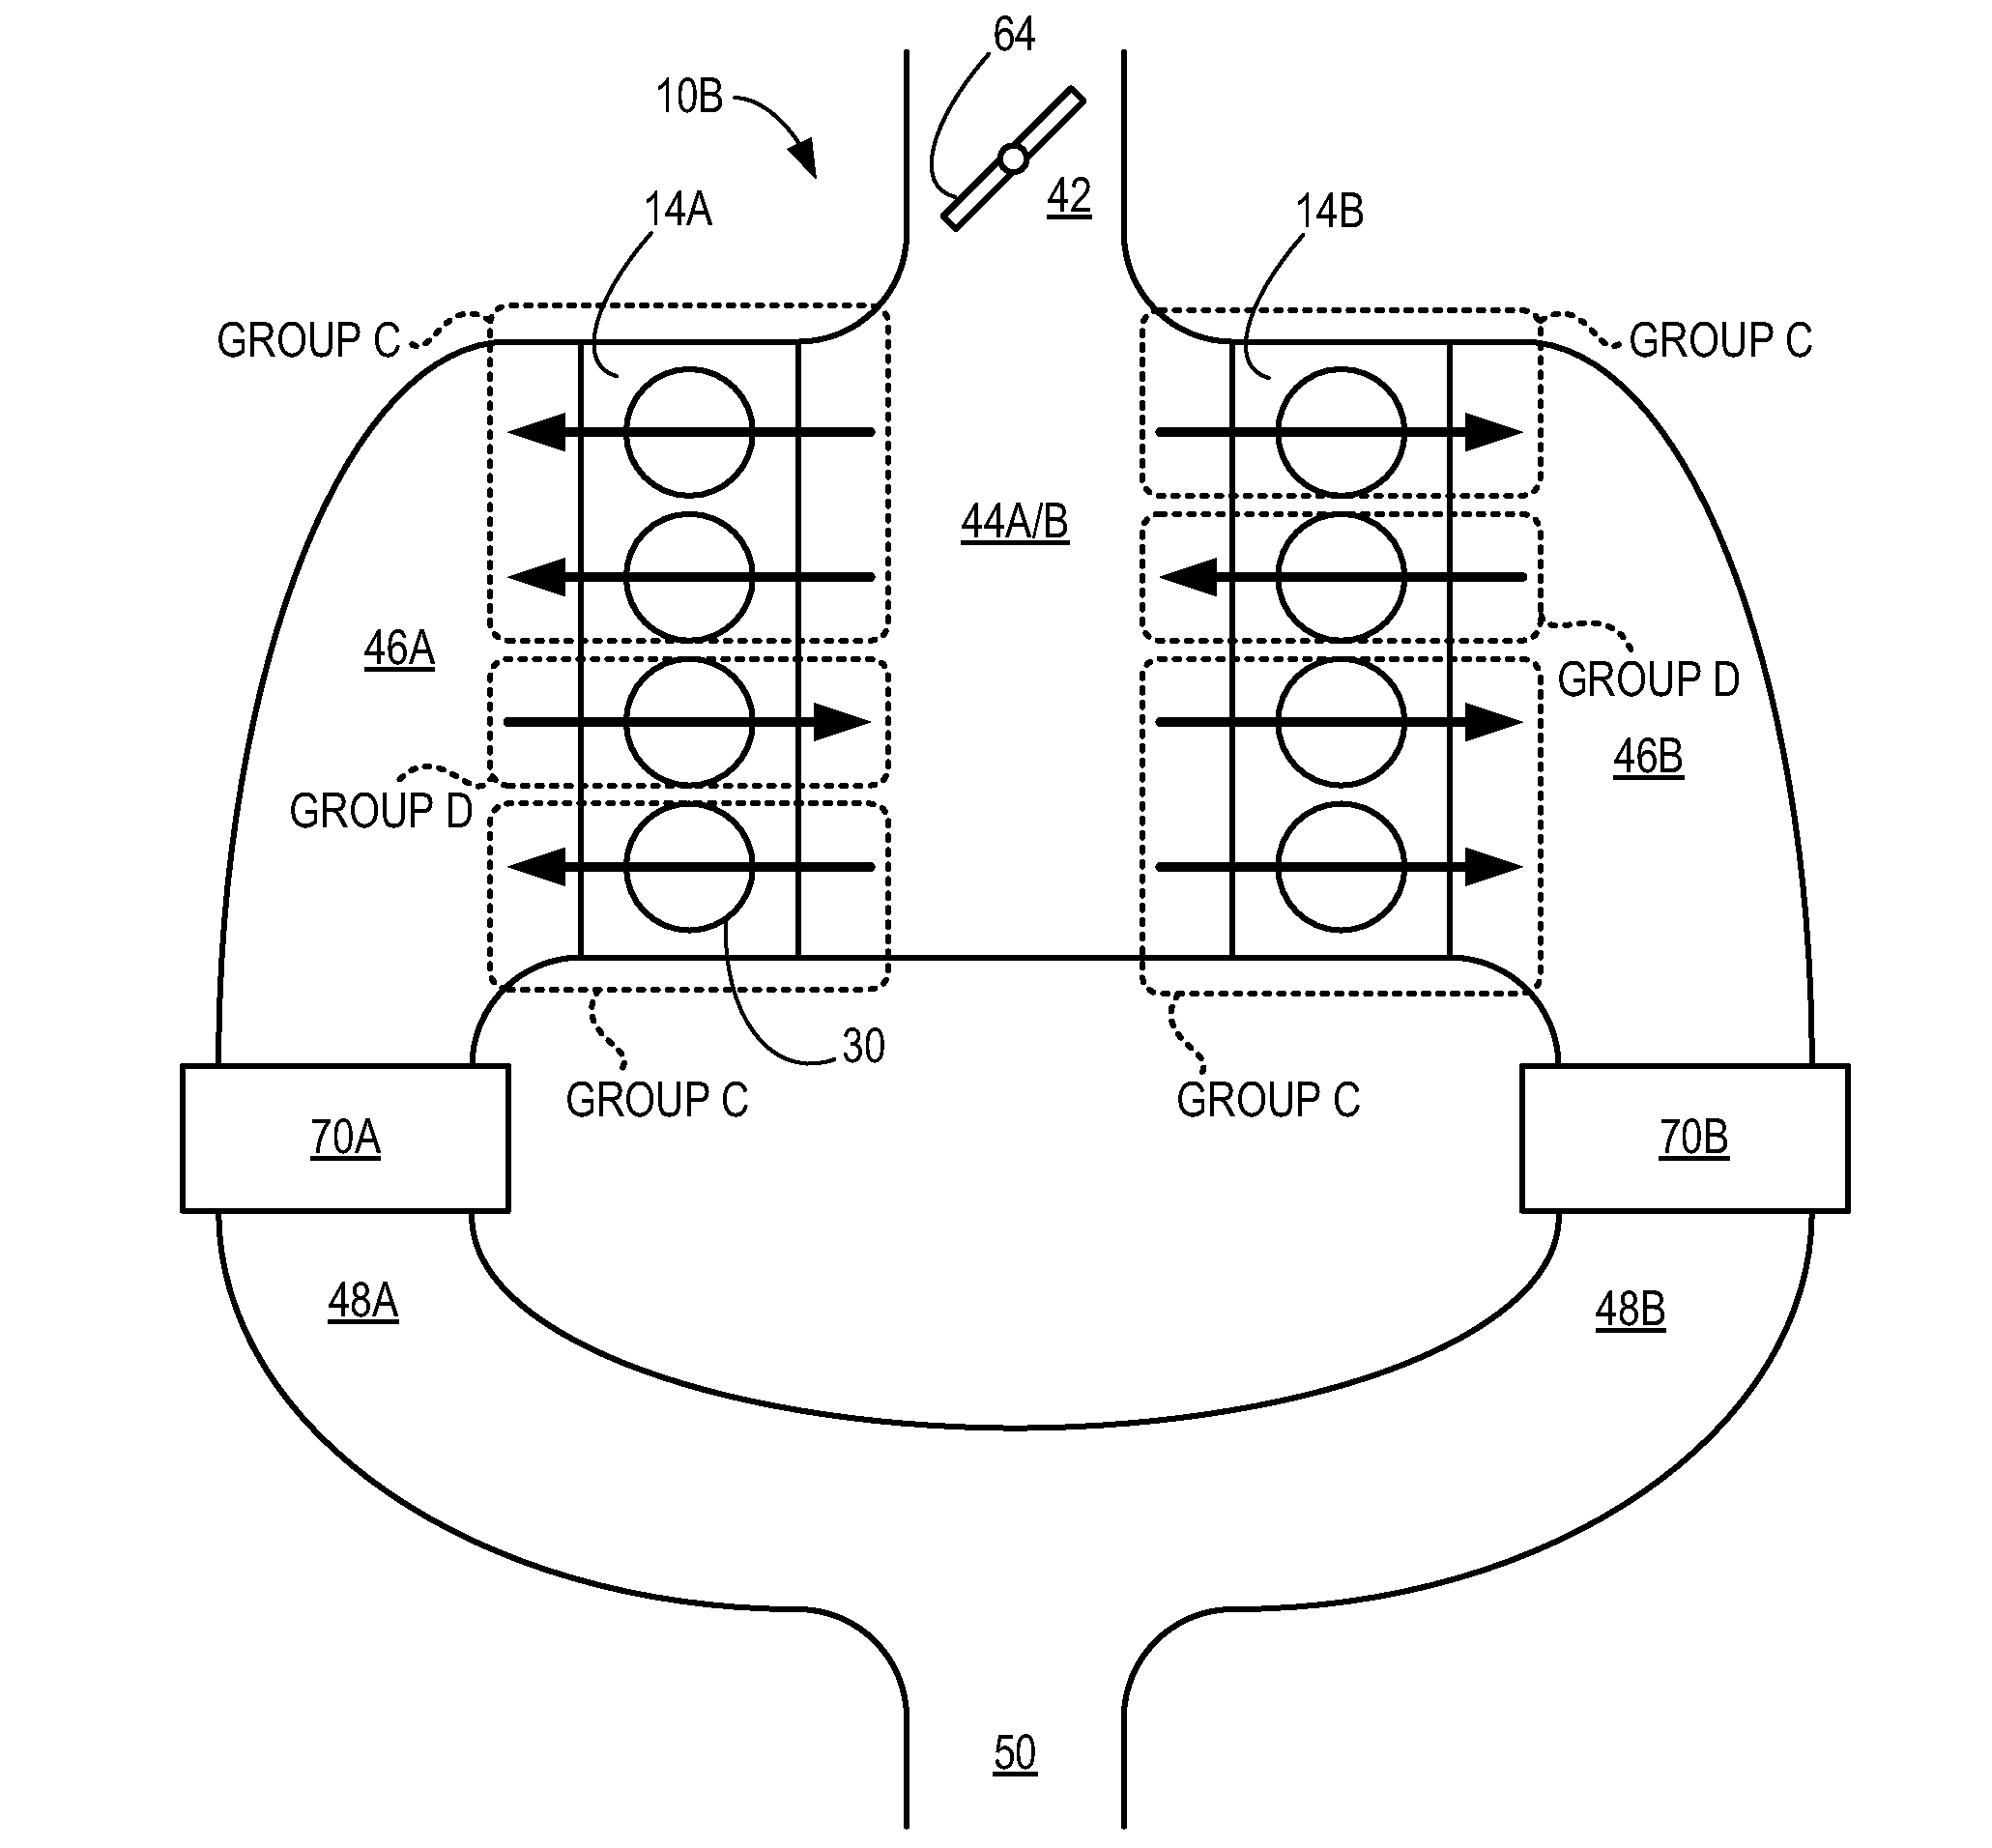 Cylinder Charge Temperature Control for an Internal Combustion Engine